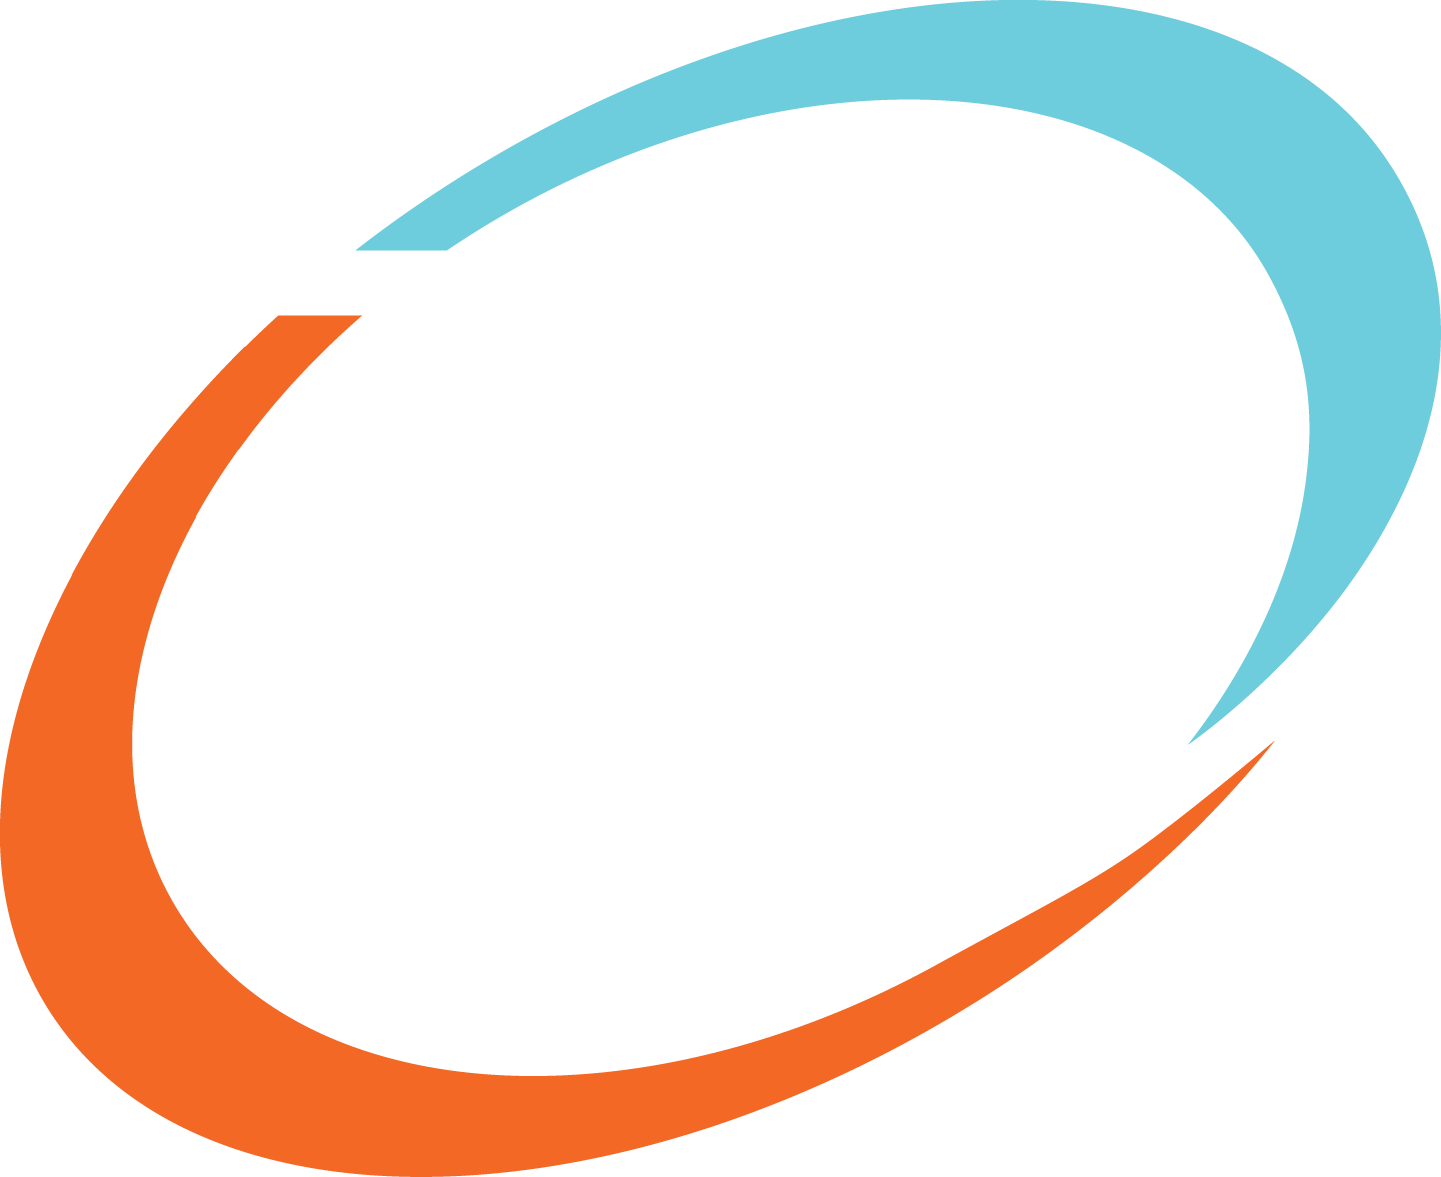 Committed Leadership